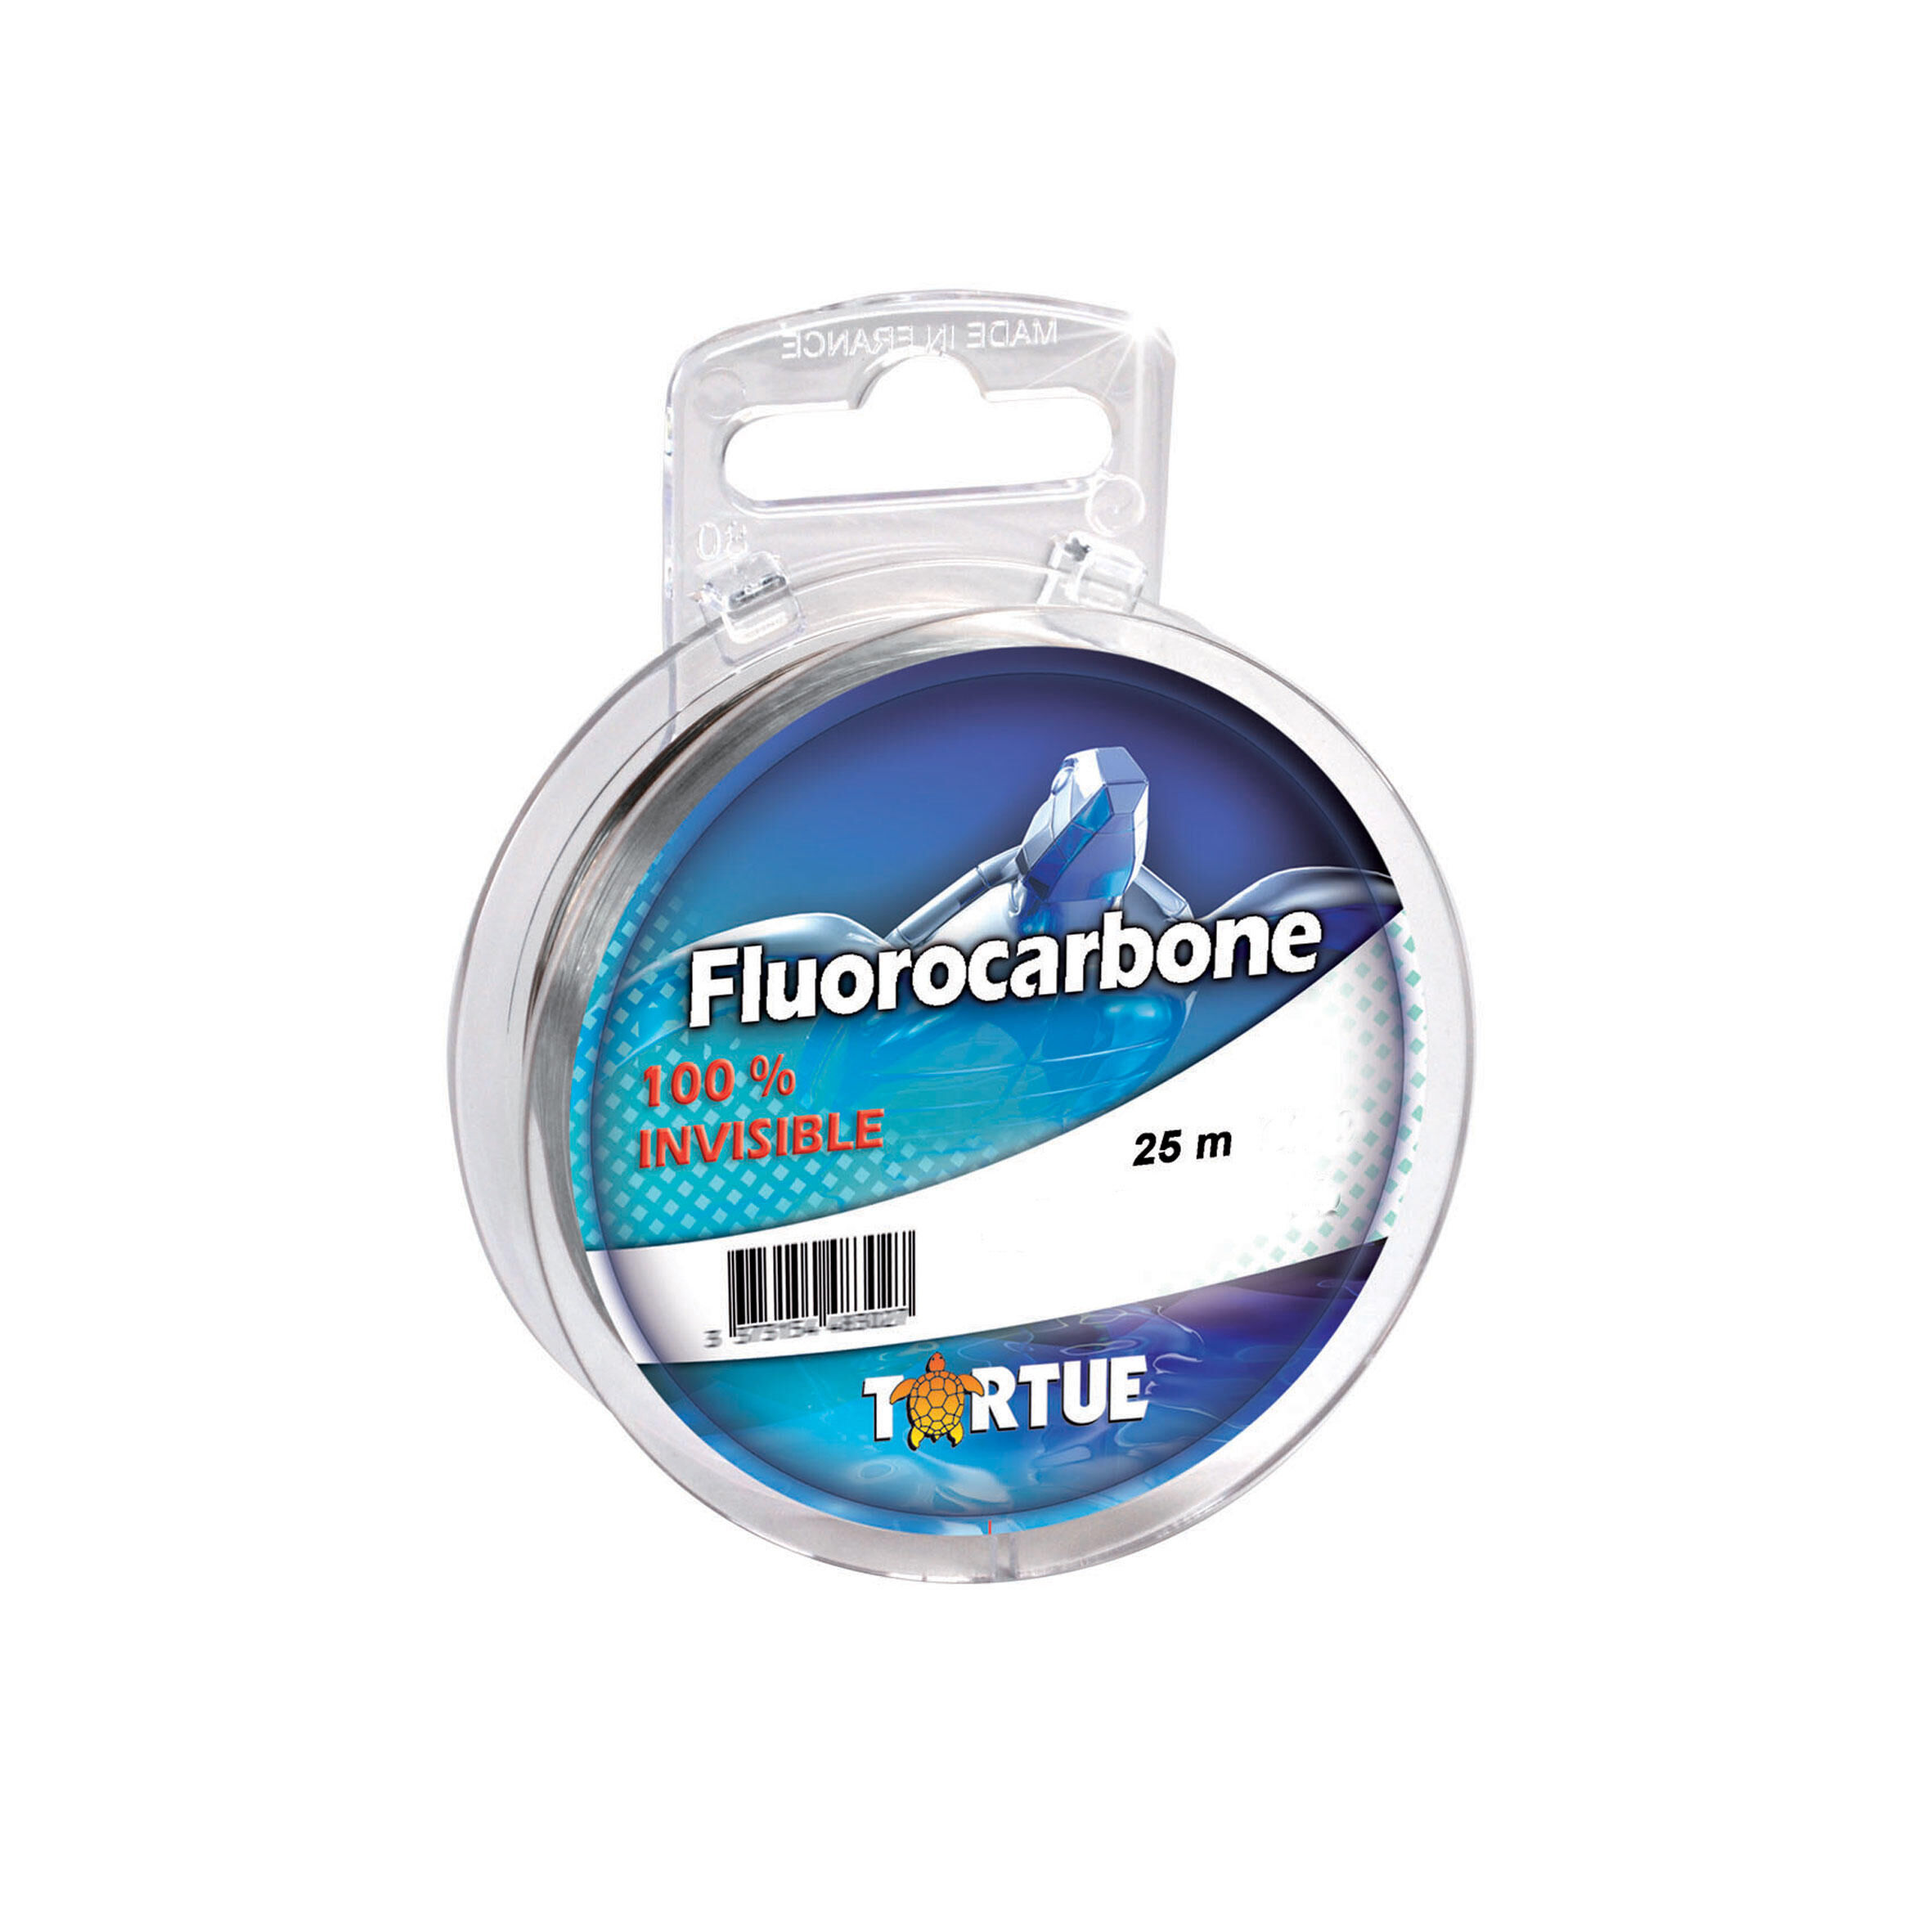 TORTUE FLUOROCARBON 25M 20/100 FLY FISHING LINE